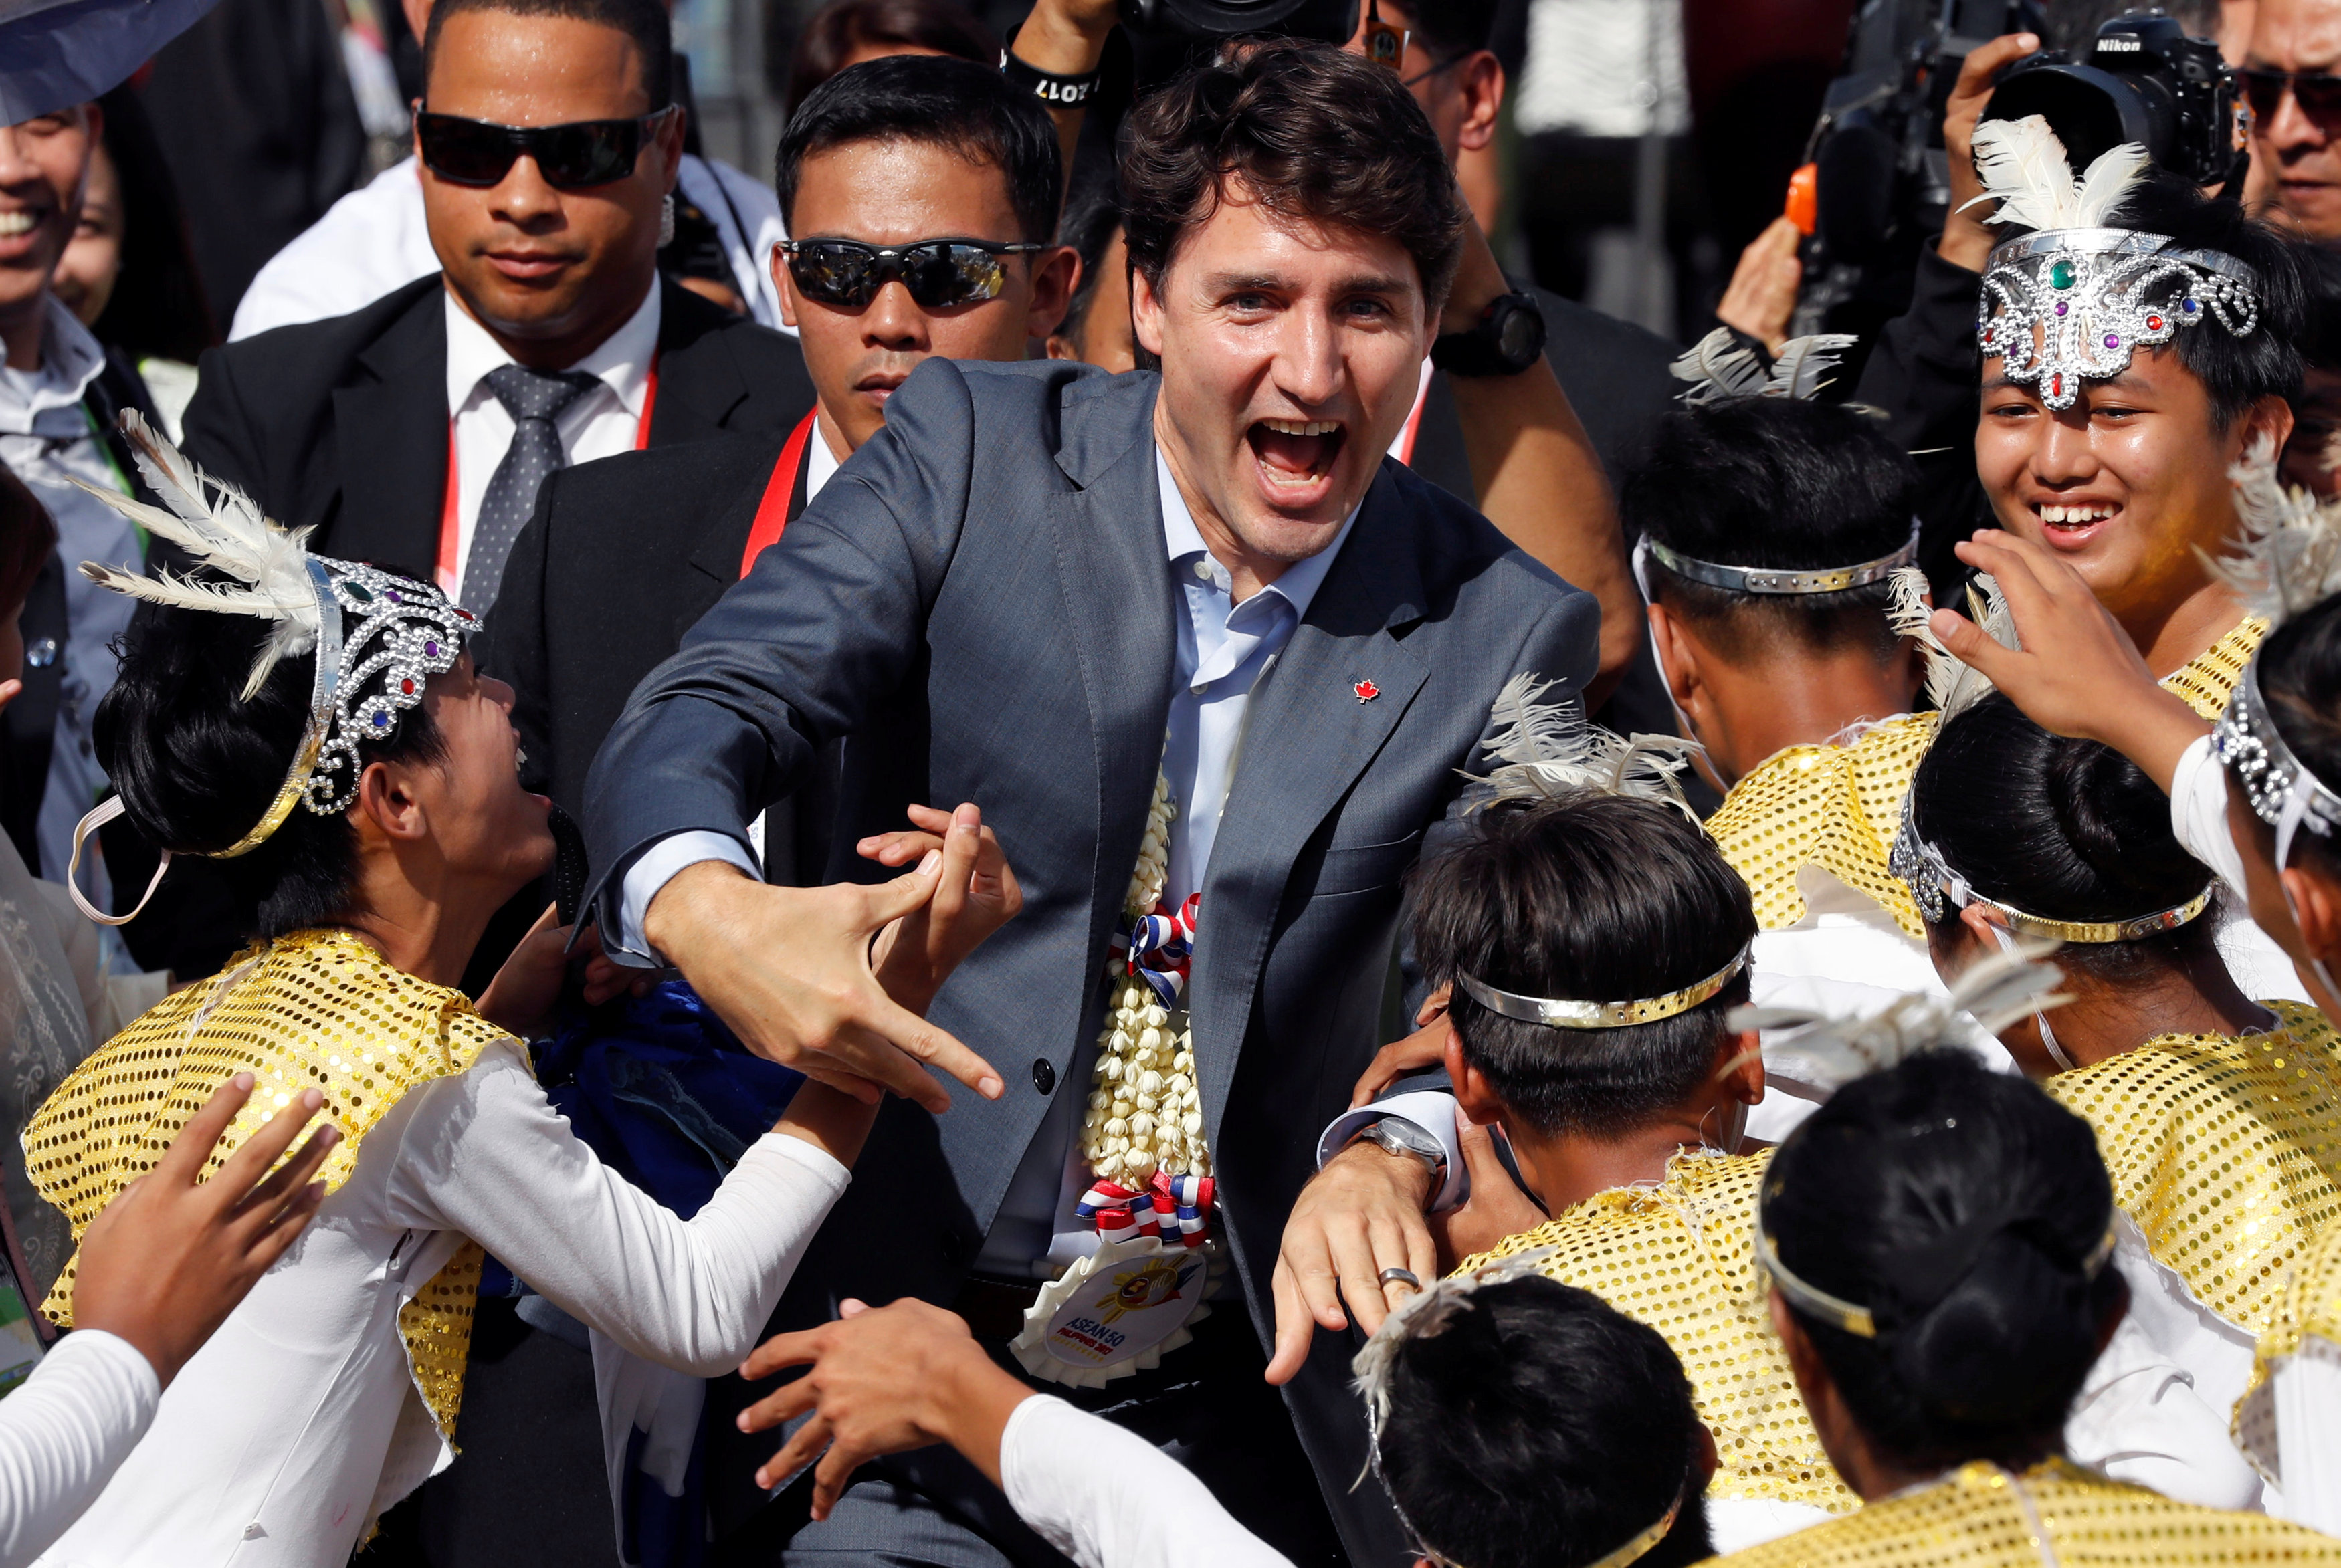 In pictures: Canada's Prime Minister Justin Trudeau charms Manila